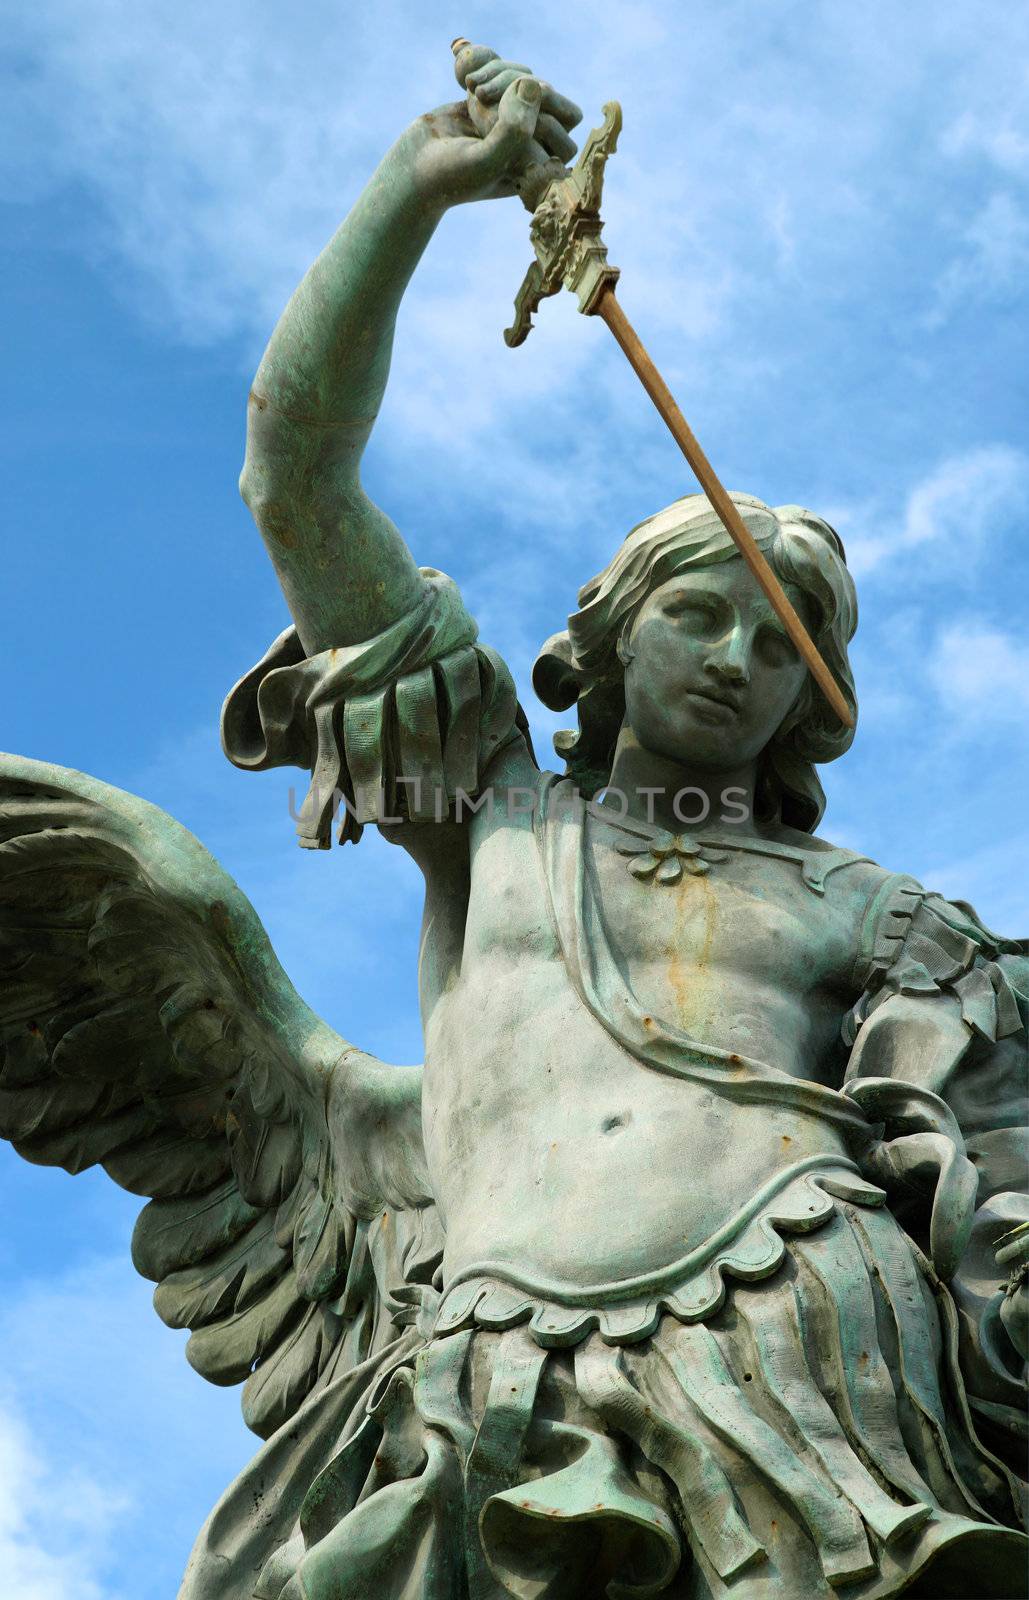 Statue of St. Michael on the top of Castel Sant' Angelo.
